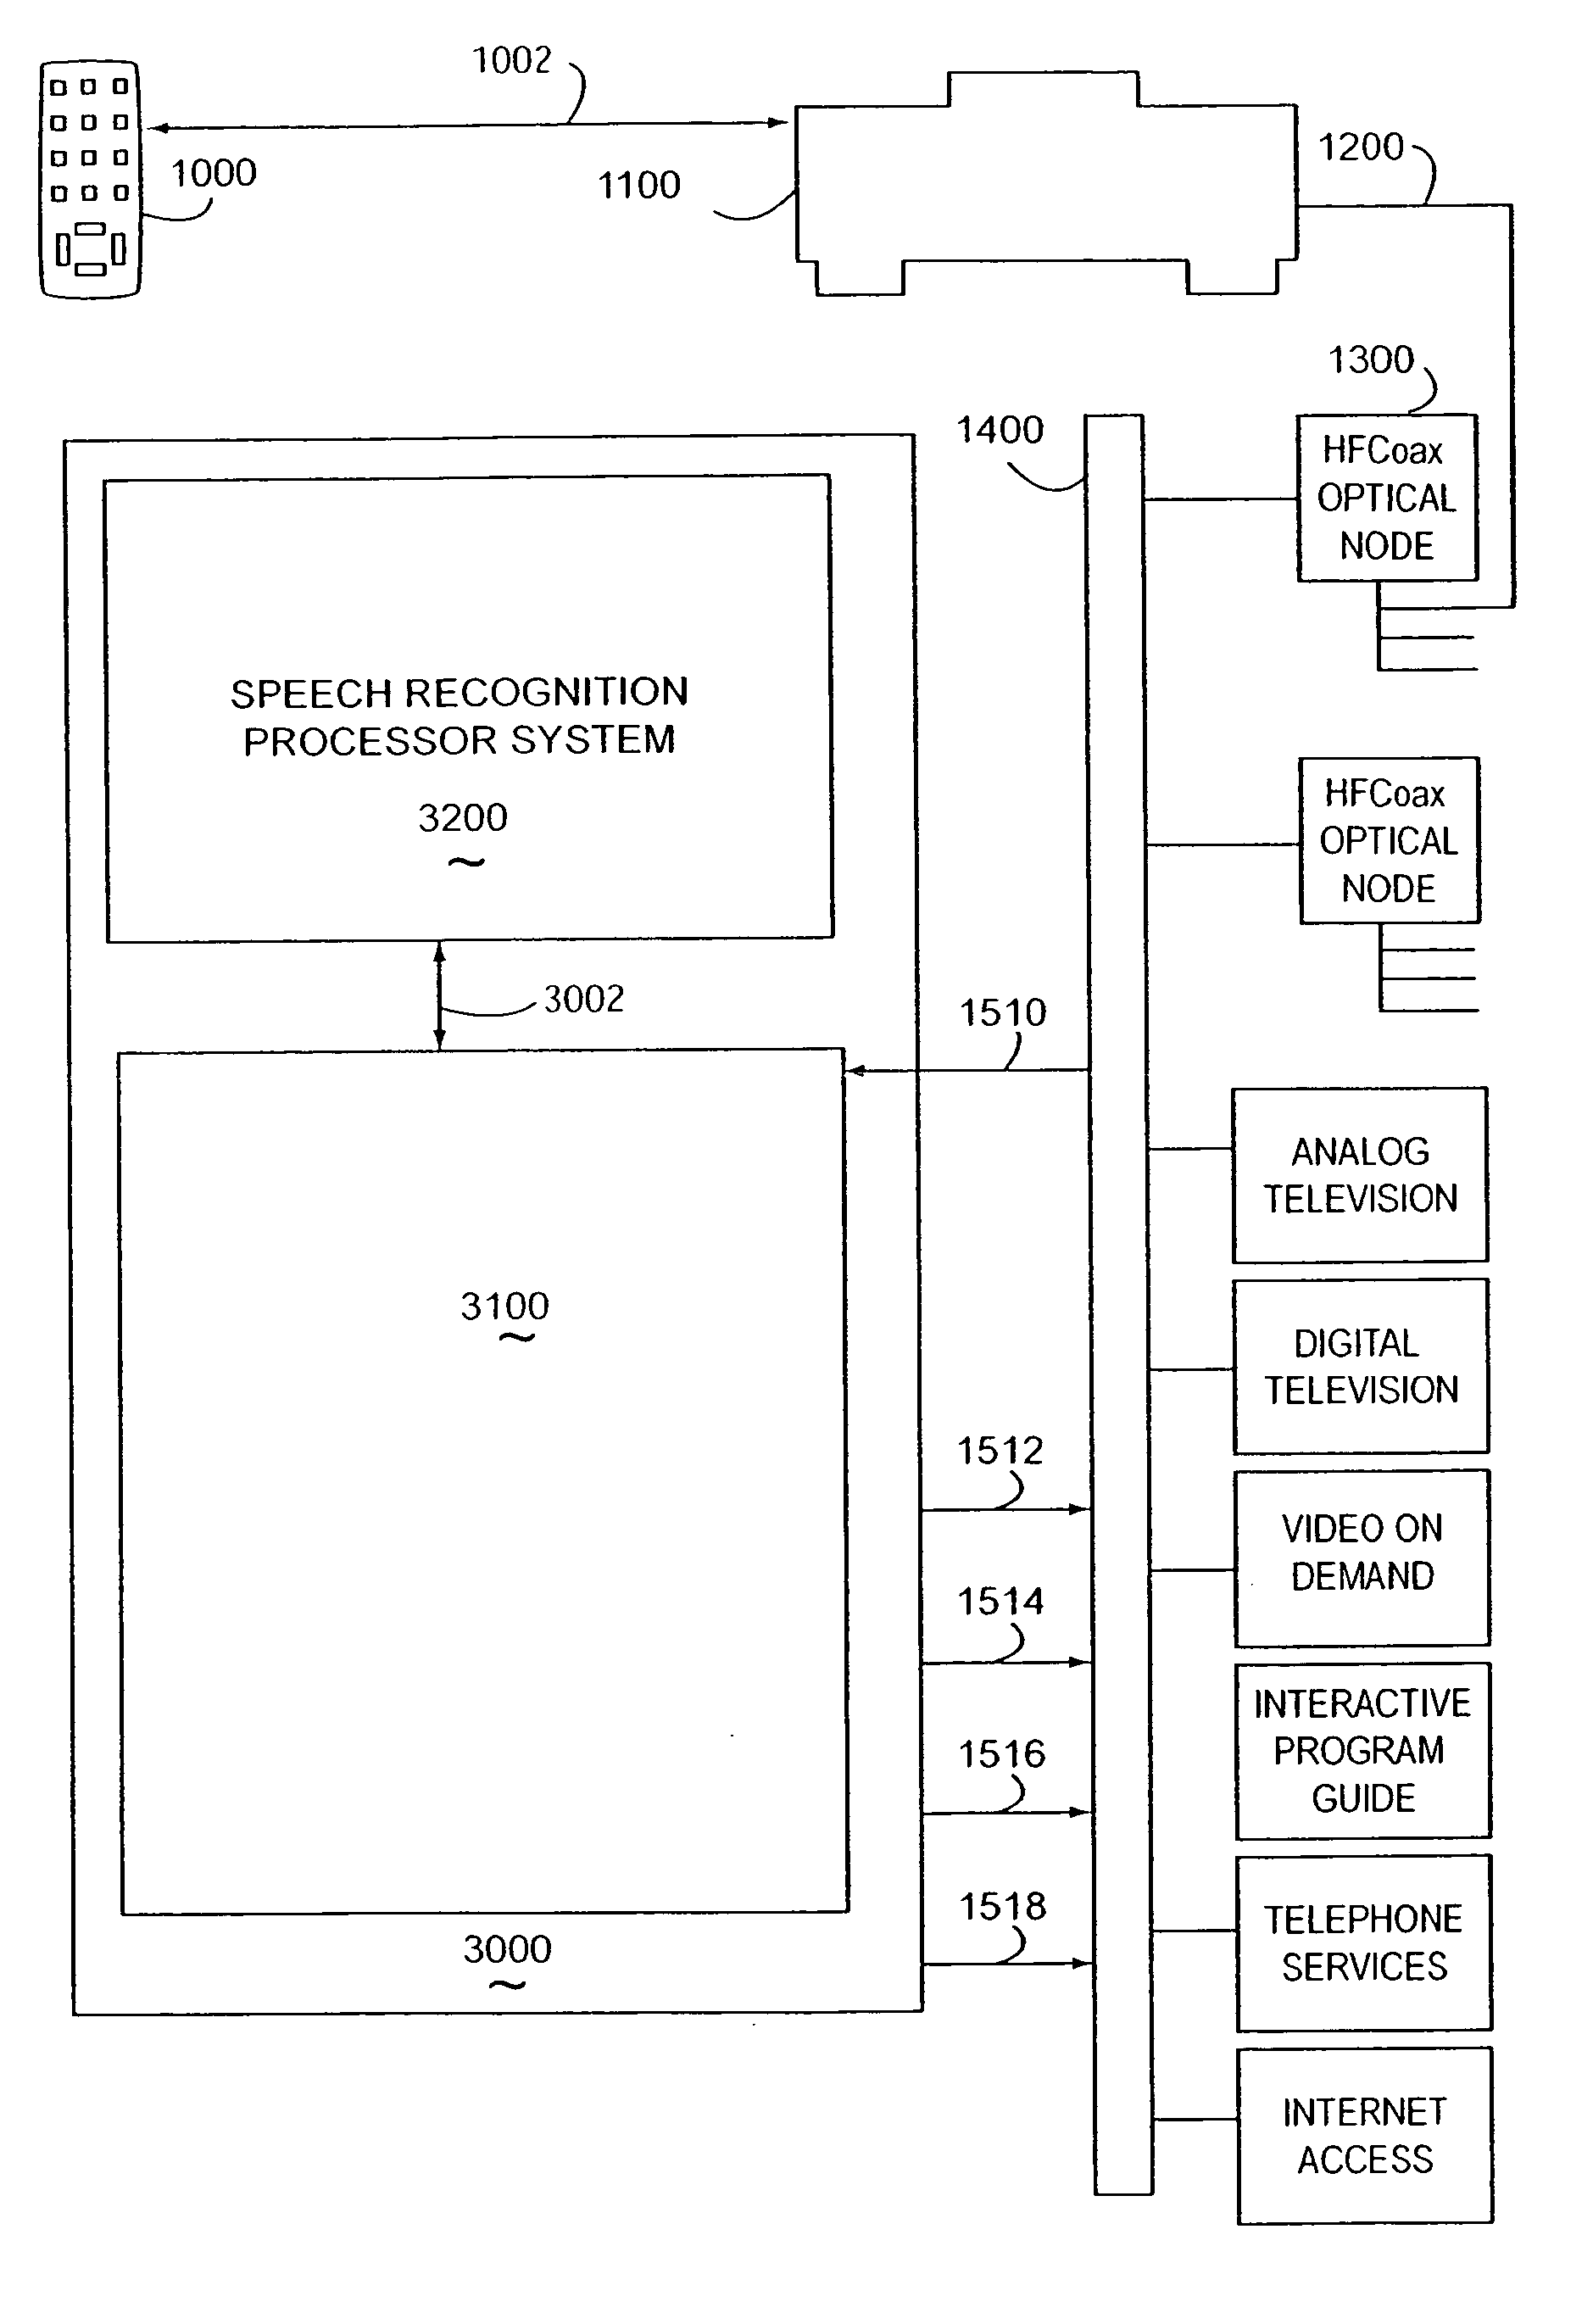 System and method of voice recognition near a wireline node of a network supporting cable television and/or video delivery